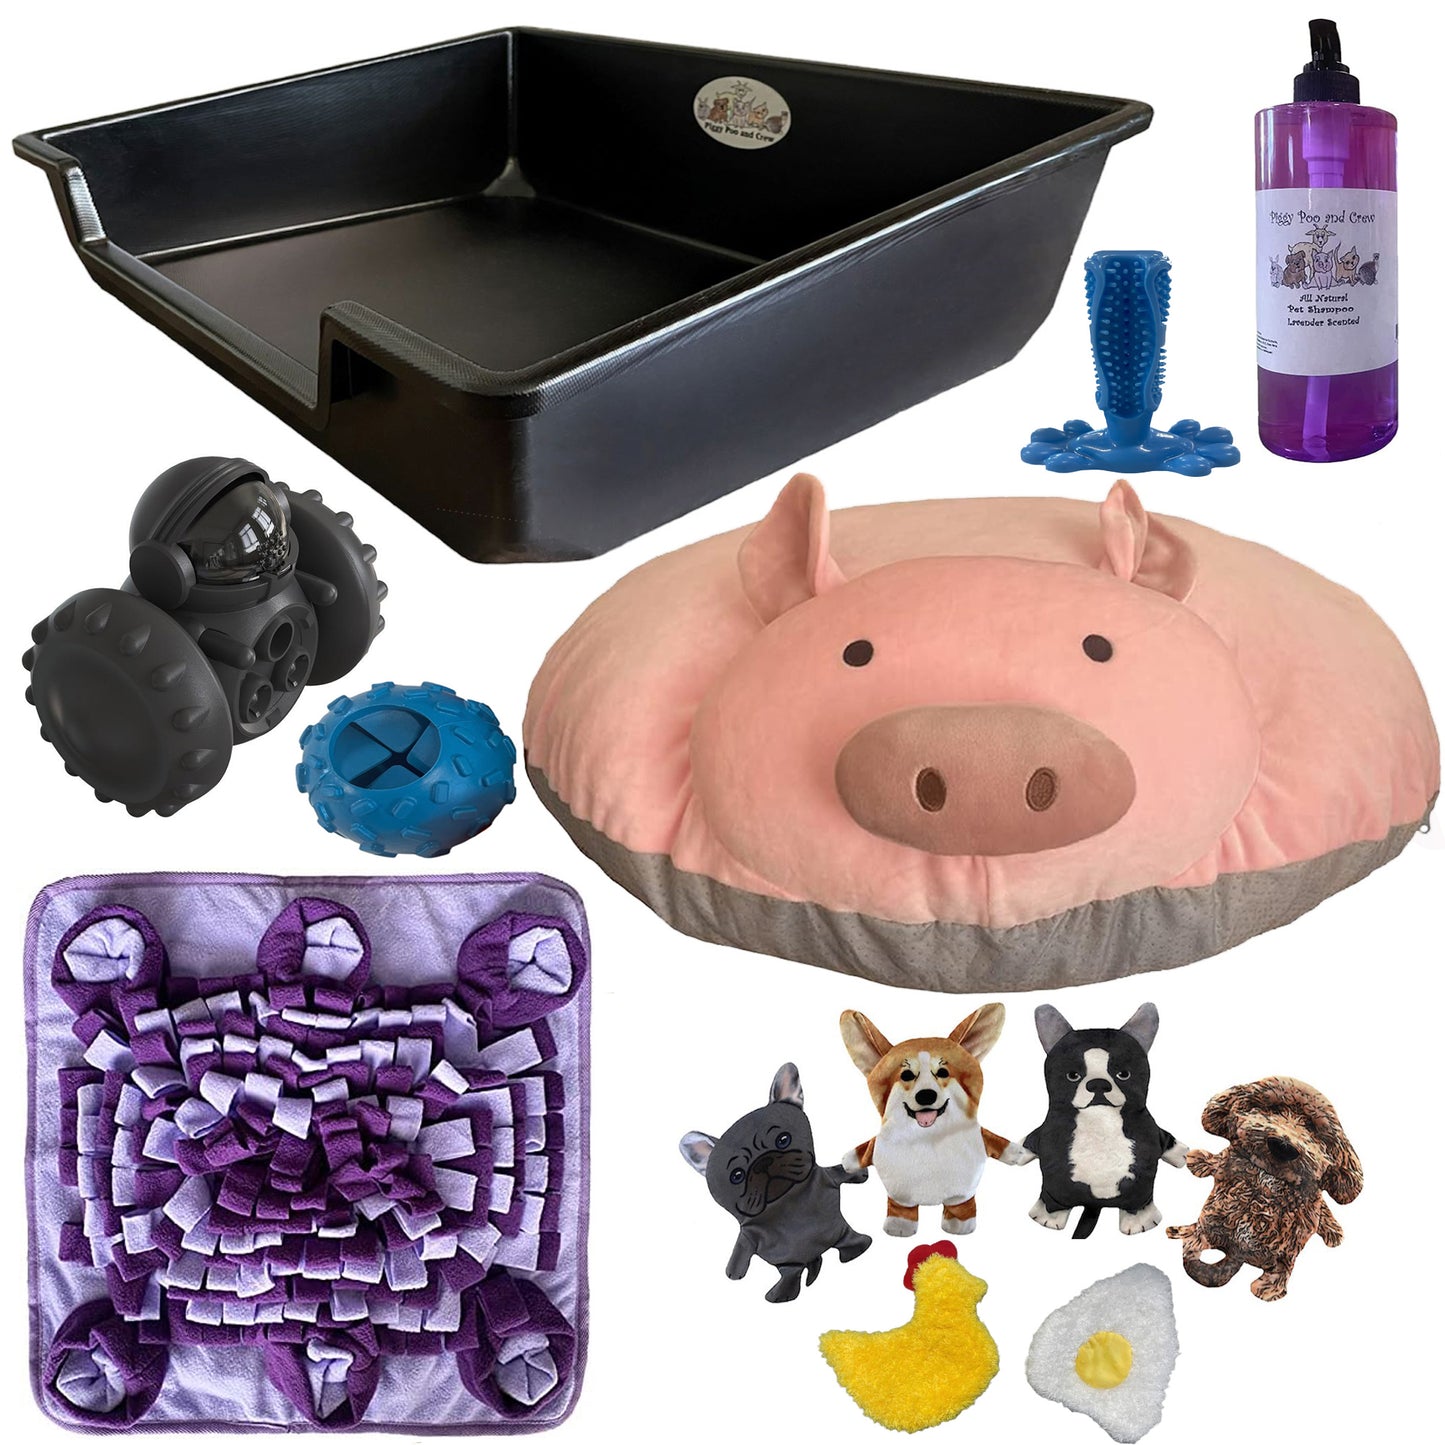 Puppy Bundle Starter Pack - Includes all The Essentials